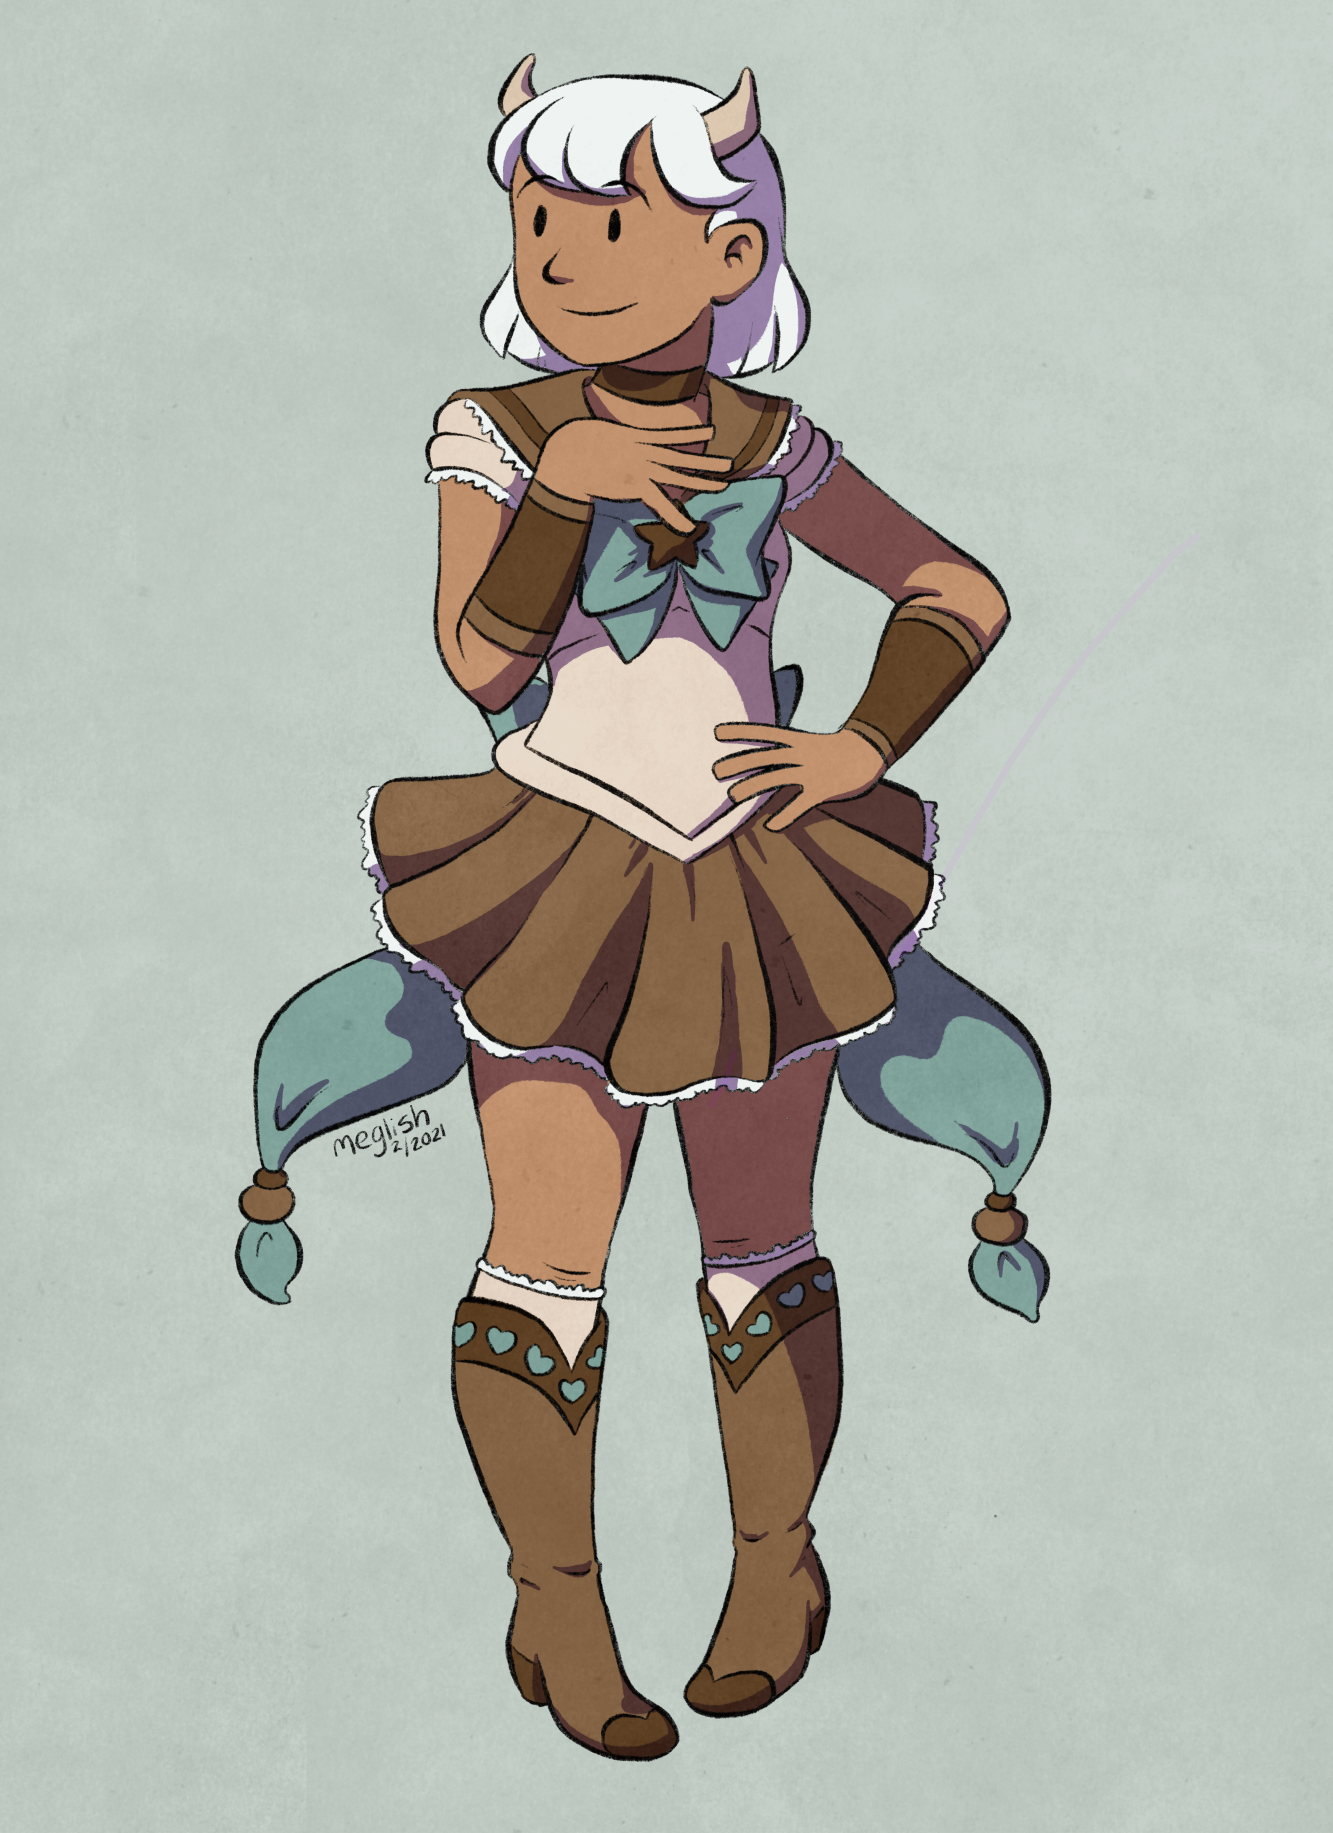 illustration of a Sailor Moon style character with bobbed white hair and small horns on the sides of her head. Her sailor outfit is shades of brown and dusty blue and she's wearing cowboy style boots.